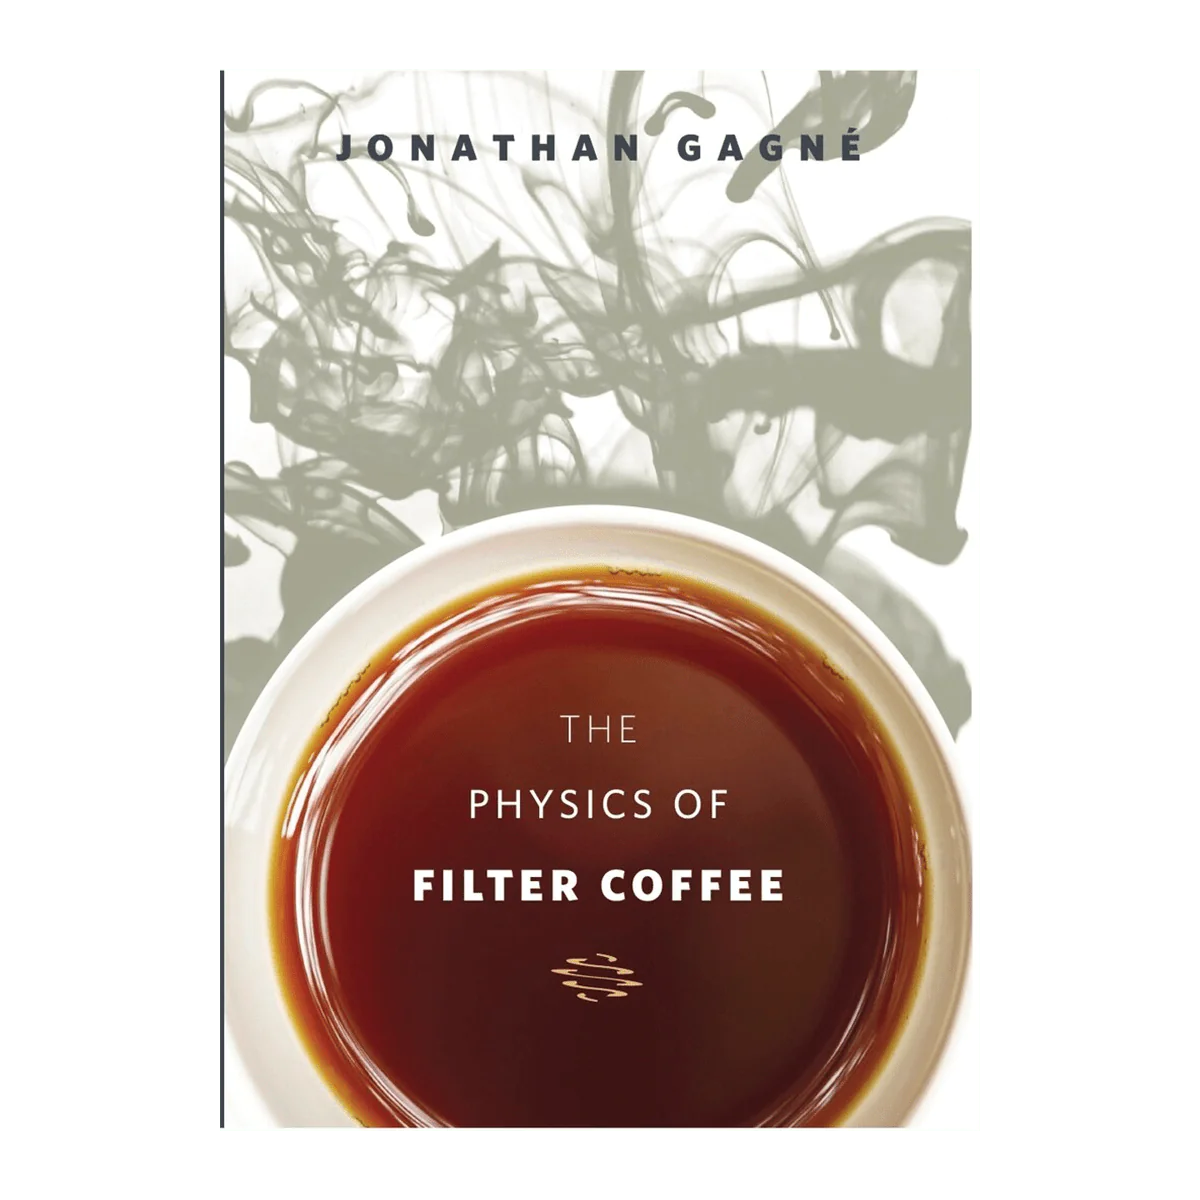 Jonathan Gagne - The Physics Of Filter Coffee - 60beans